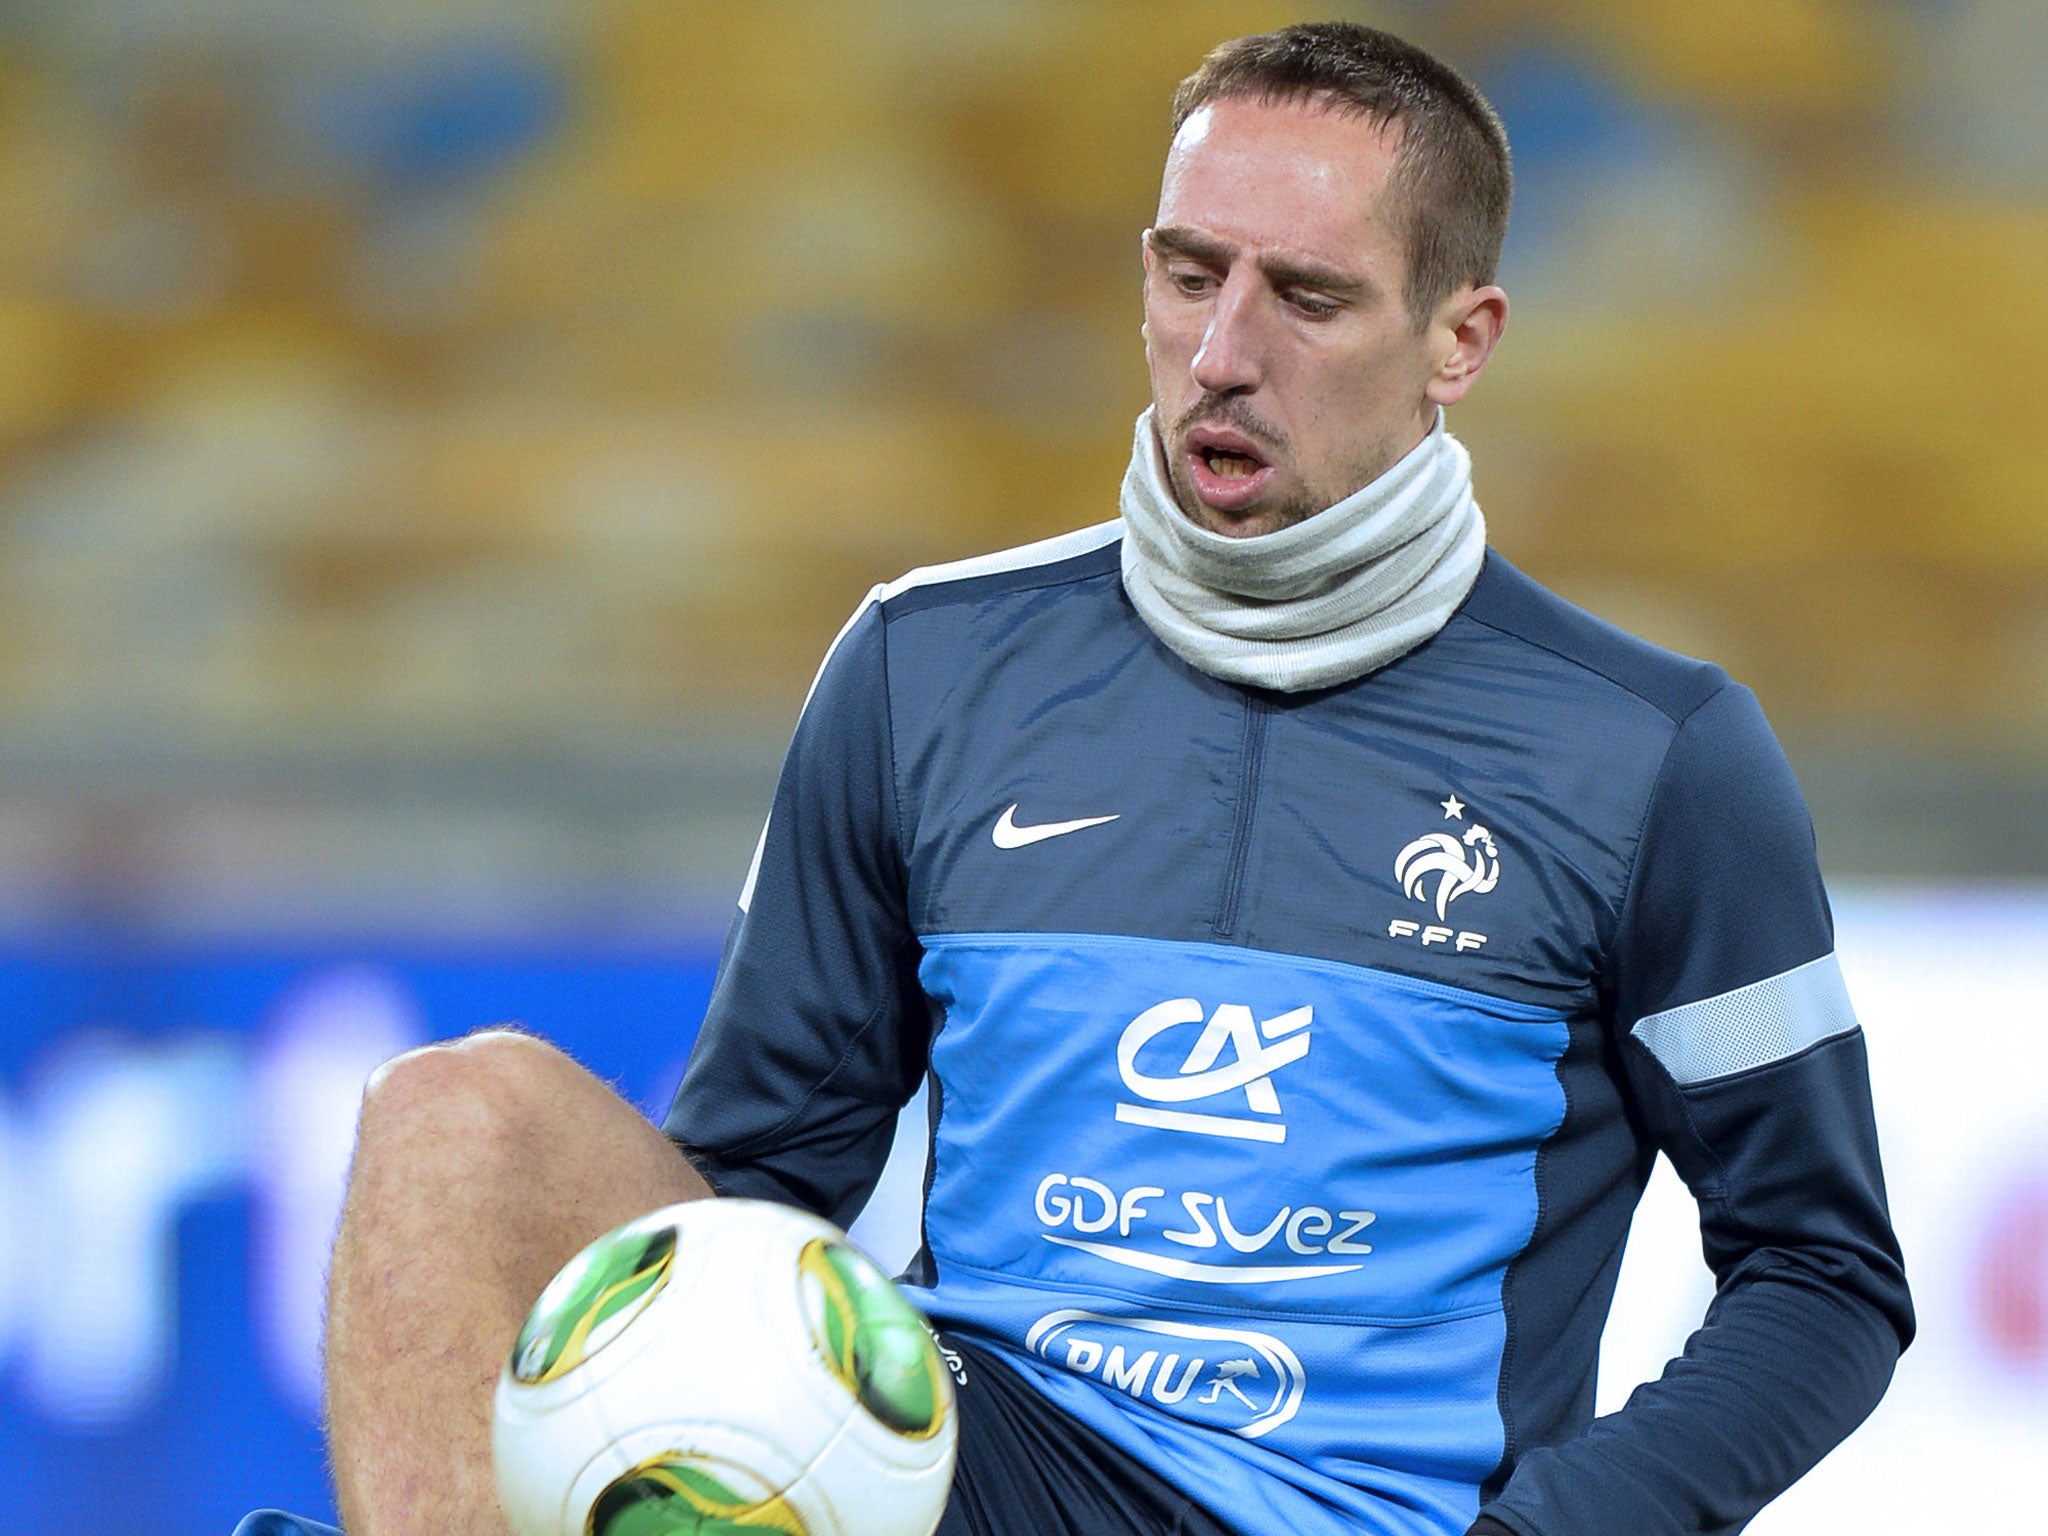 Franck Ribery is expected to feature for France against Ukraine on Friday night